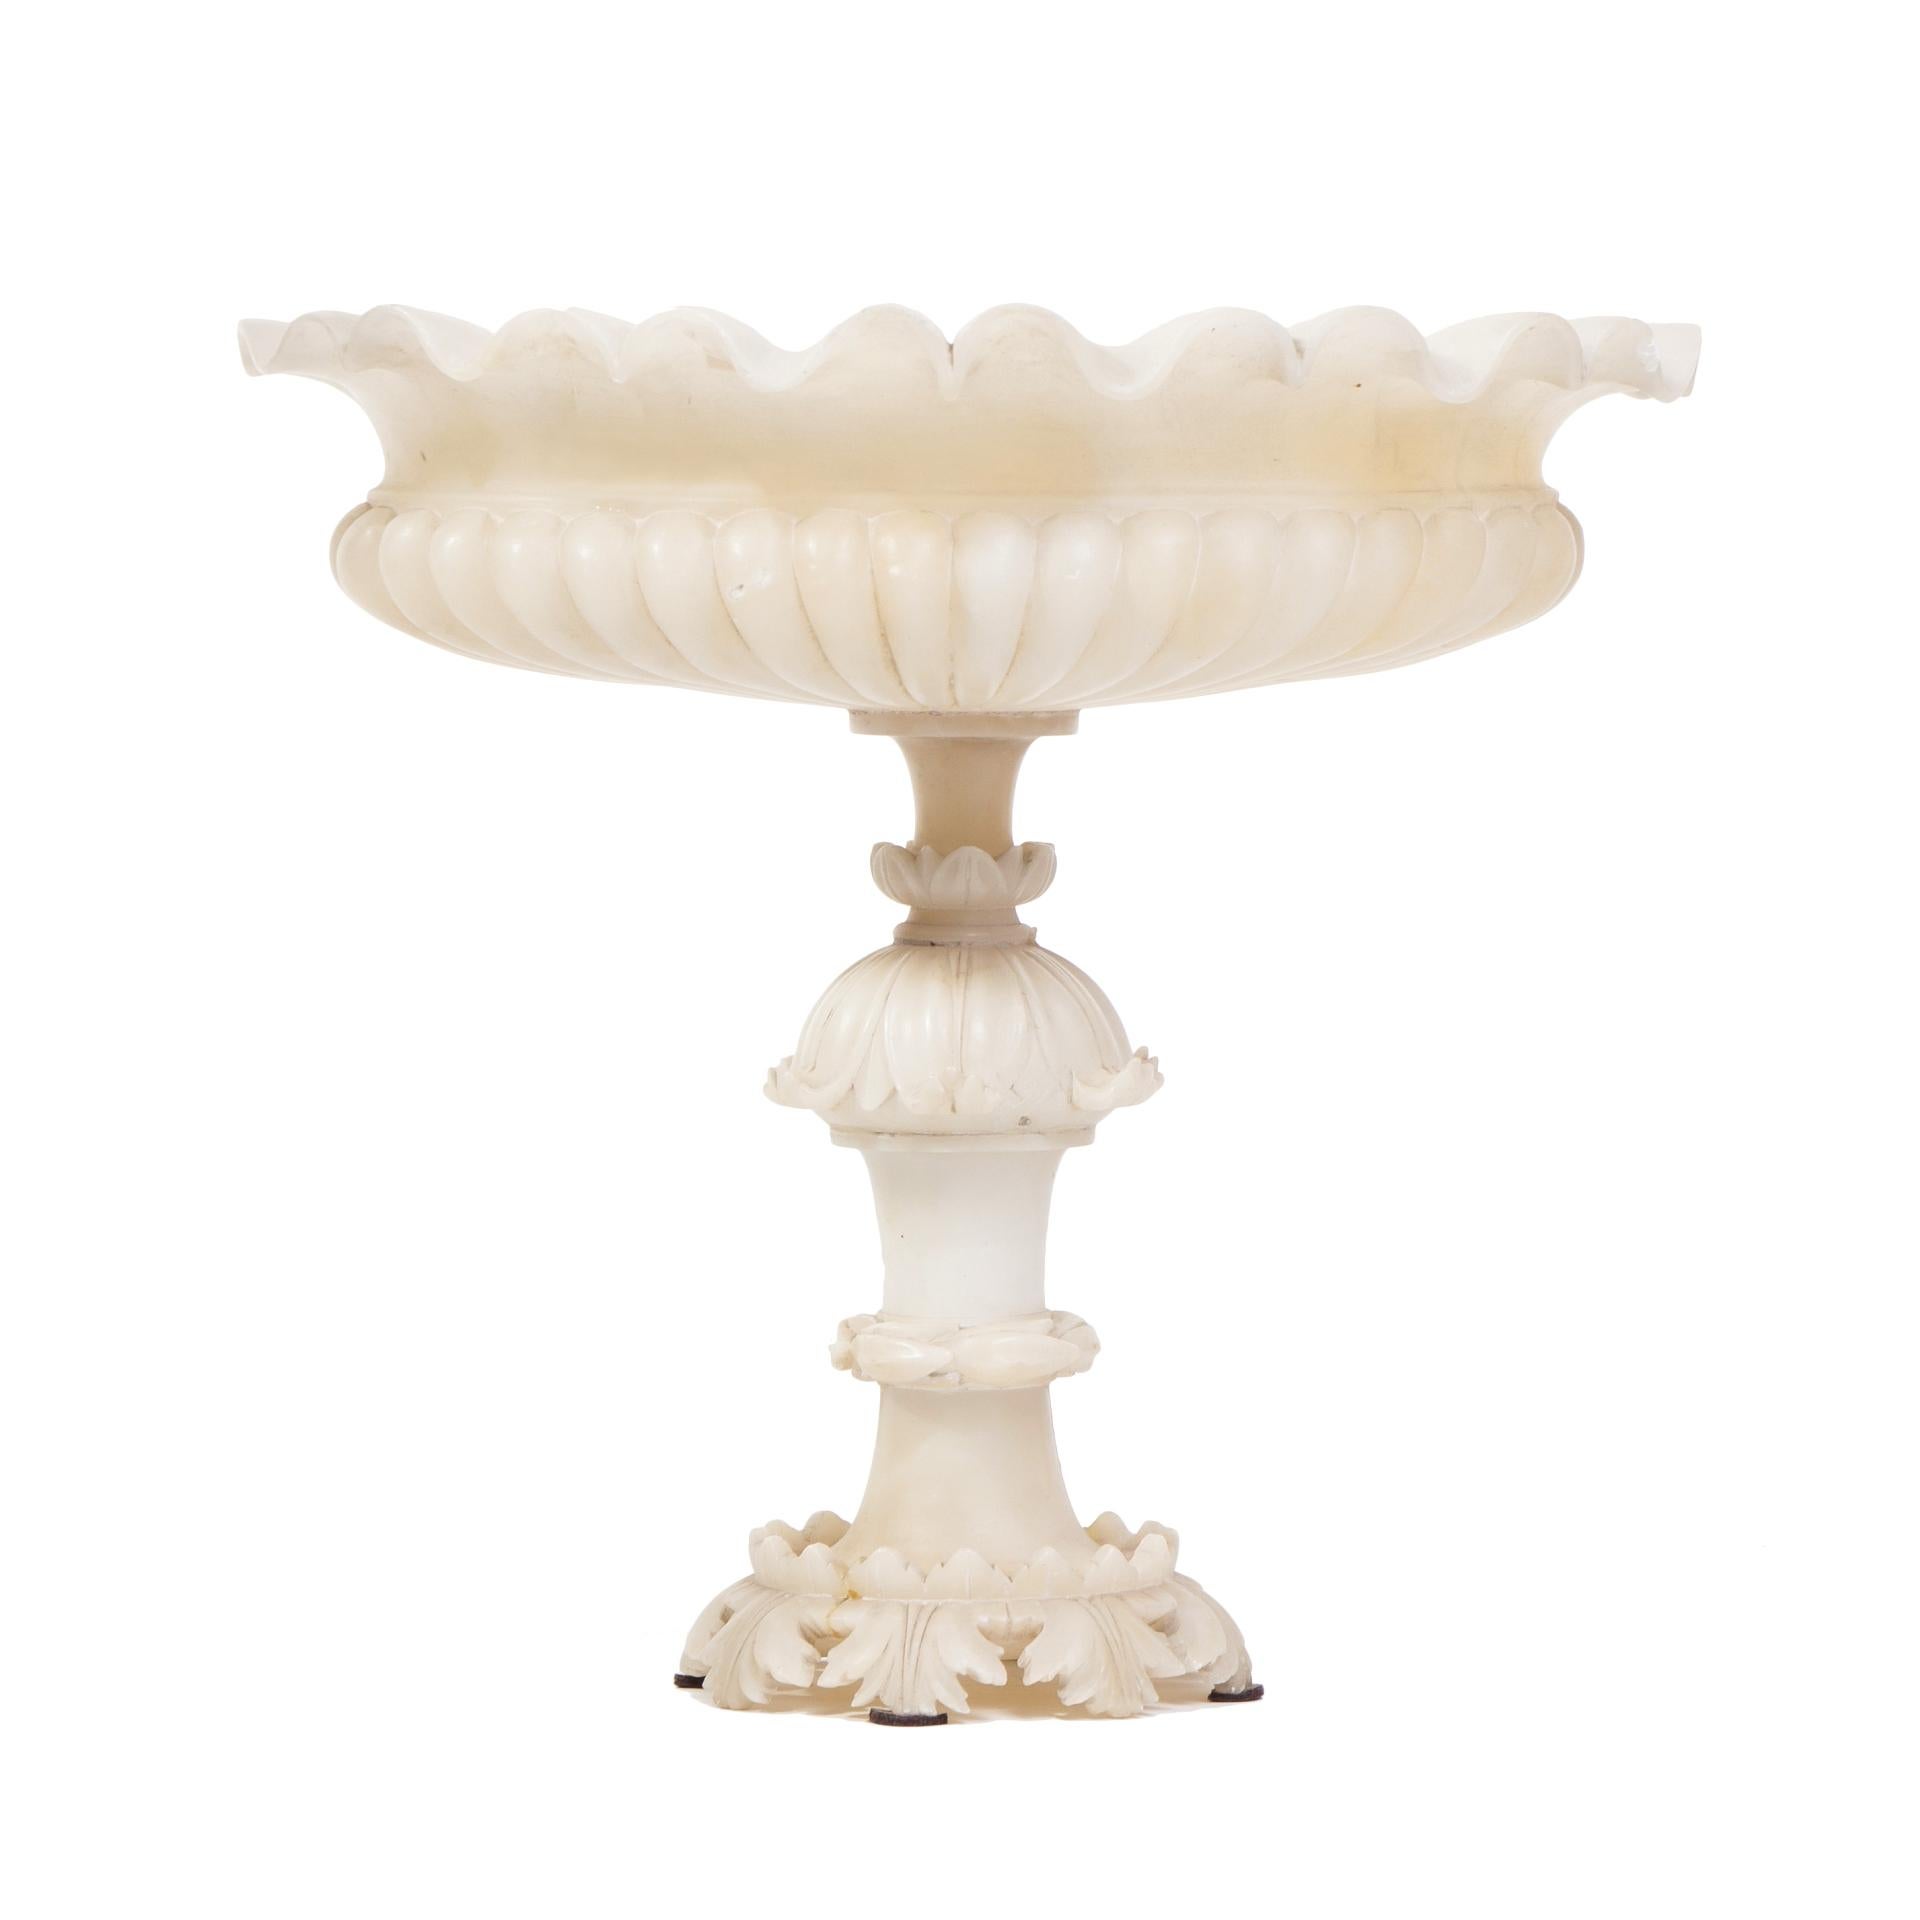 This large alabaster epergne is absolutely stunning genuine piece, first half of the 19th century.

Supported by a slender and tall leg is a fine display of the Biedermeier-style craft grandeur.

Epergne was creating in the last period of